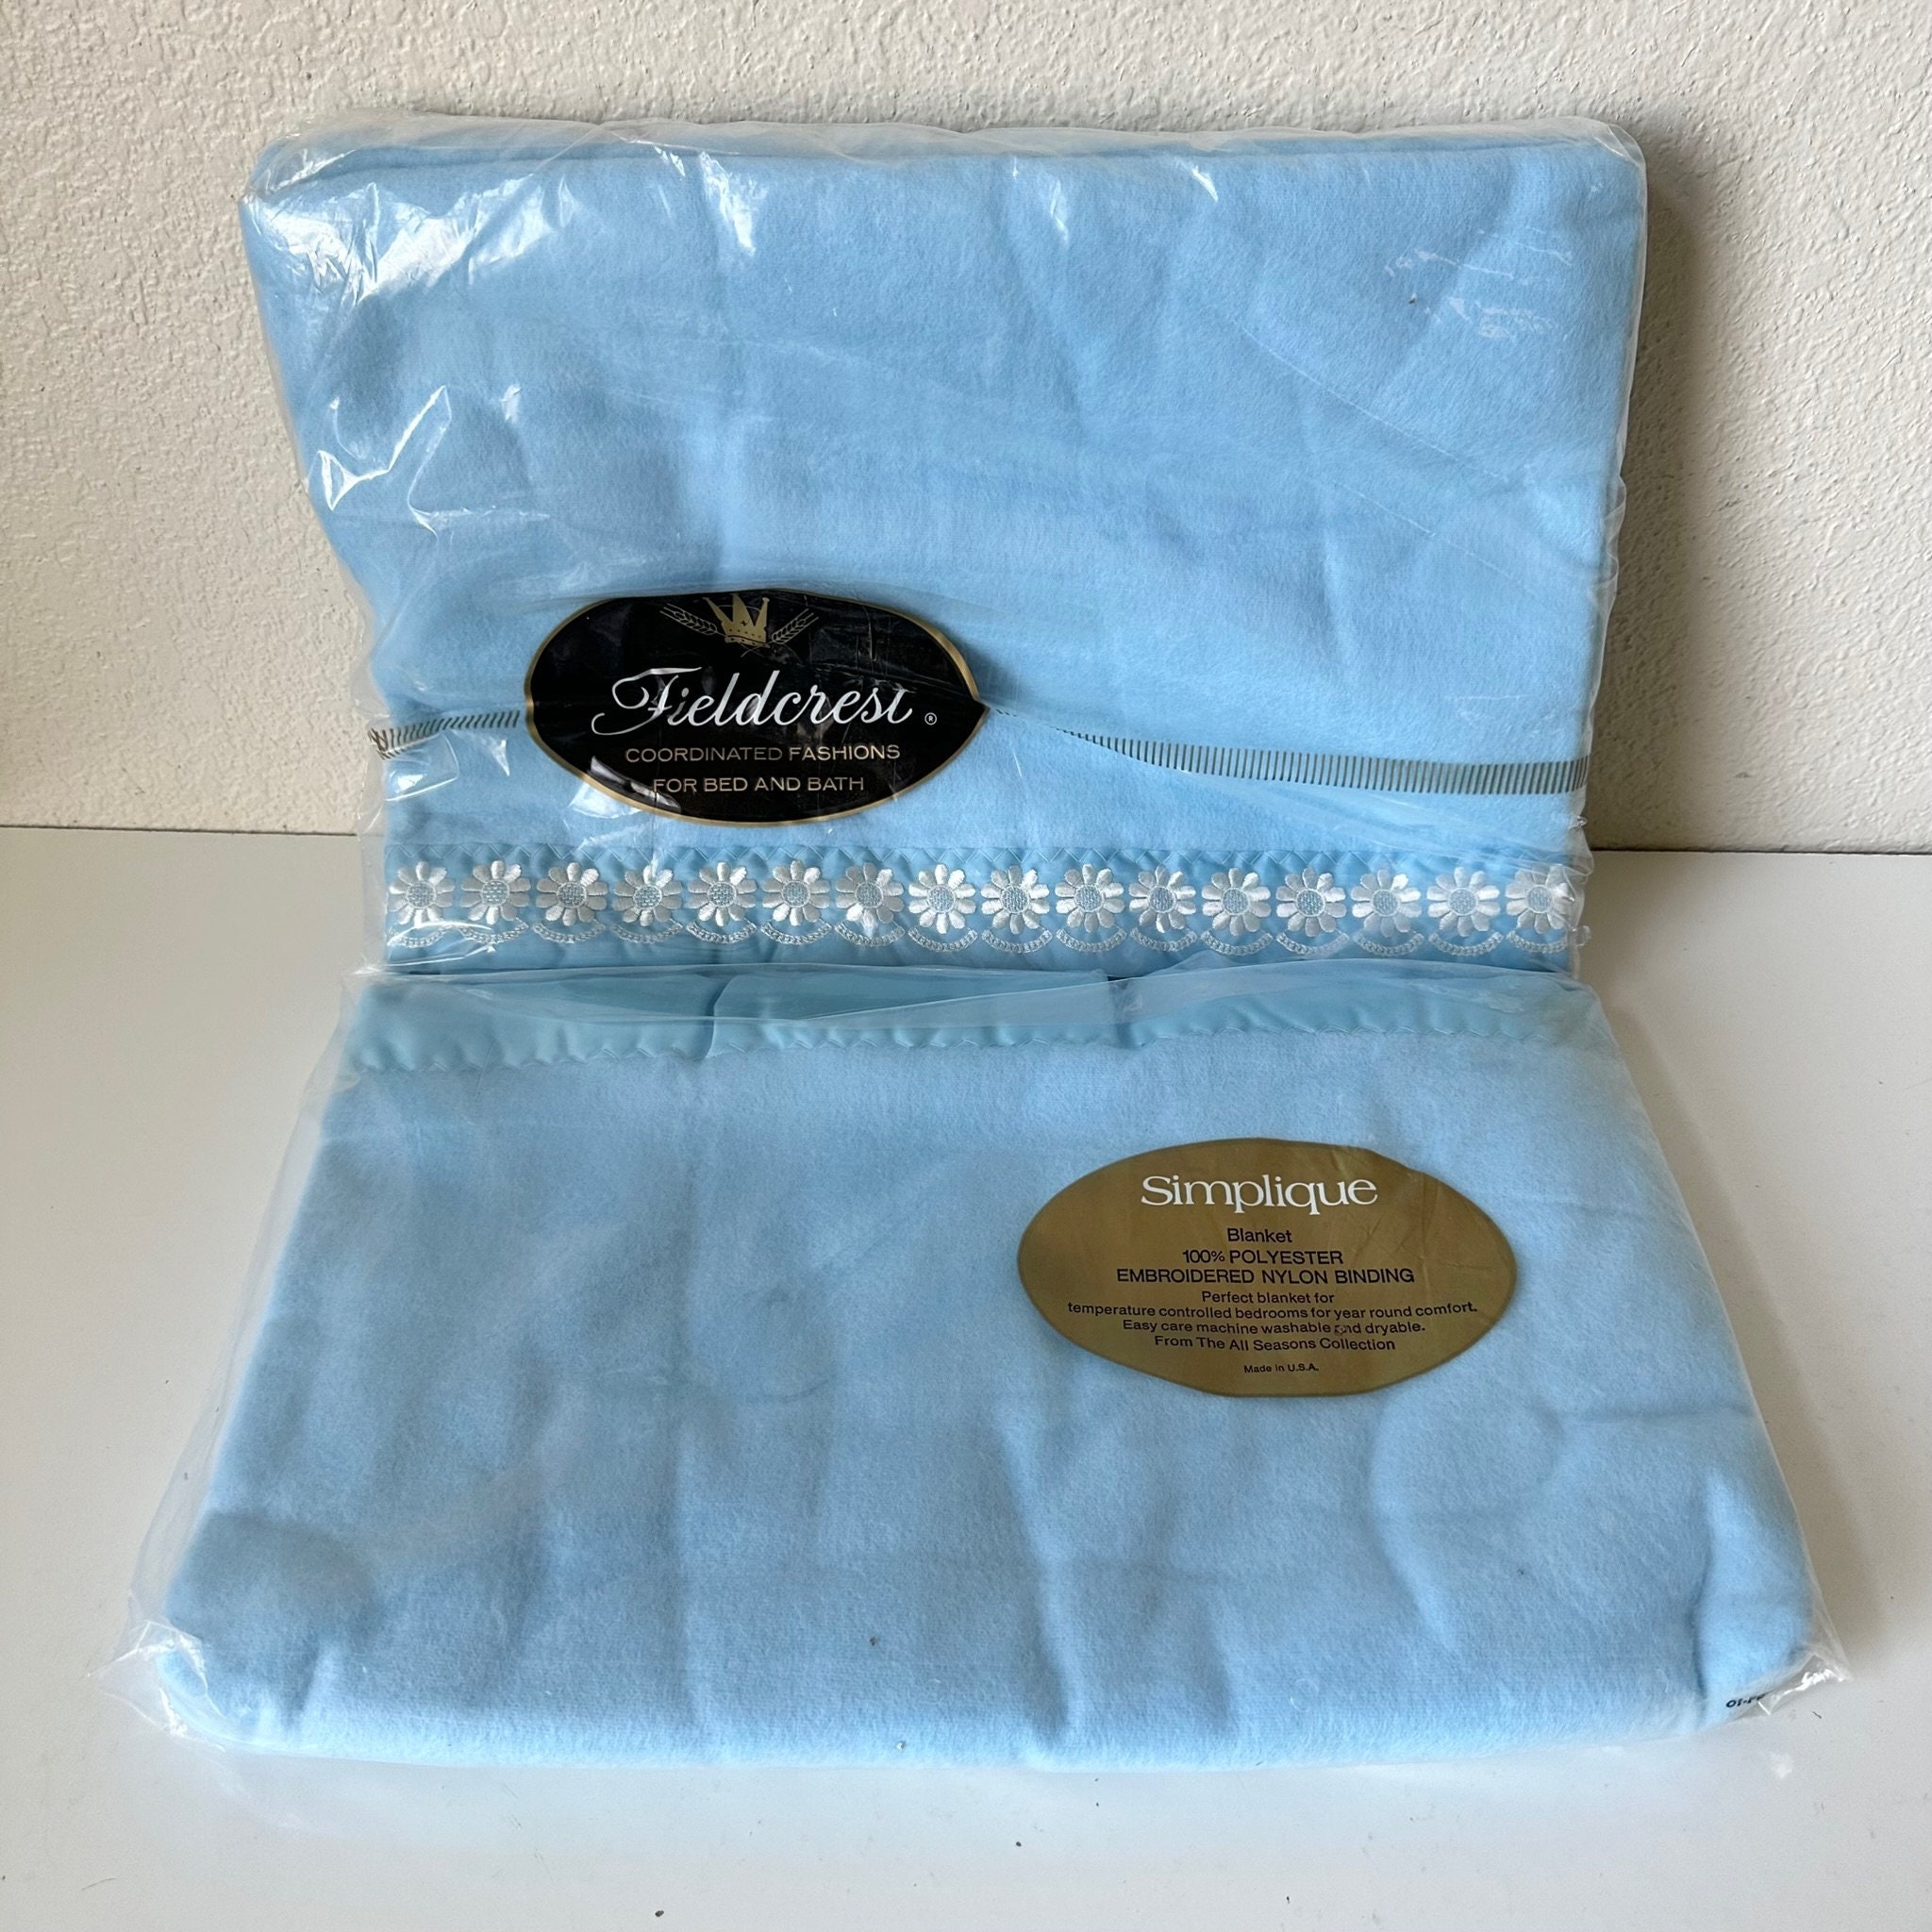  Unknown1 Satin Fleece Blanket Binding Edges Throw Robin Egg Blue  Solid Color Modern Contemporary : Home & Kitchen